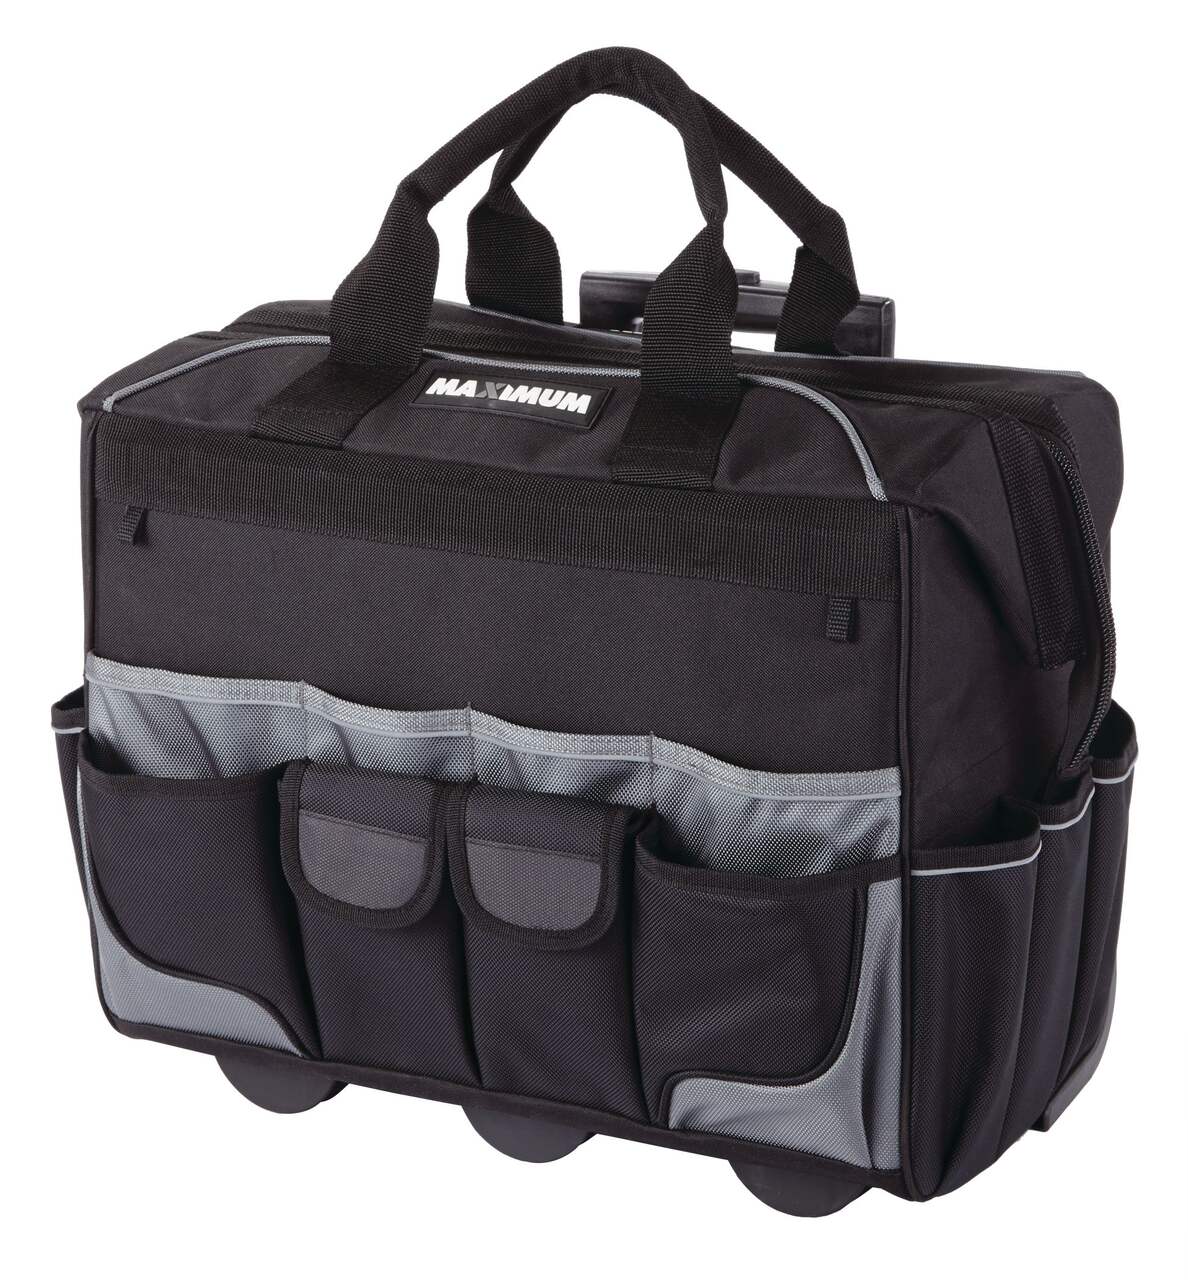 https://media-www.canadiantire.ca/product/fixing/tools/tool-storage/0581278/maximum-18-tool-bag-with-wheels-9474e2ac-1a7b-494c-981d-9a6e6402323c-jpgrendition.jpg?imdensity=1&imwidth=640&impolicy=mZoom